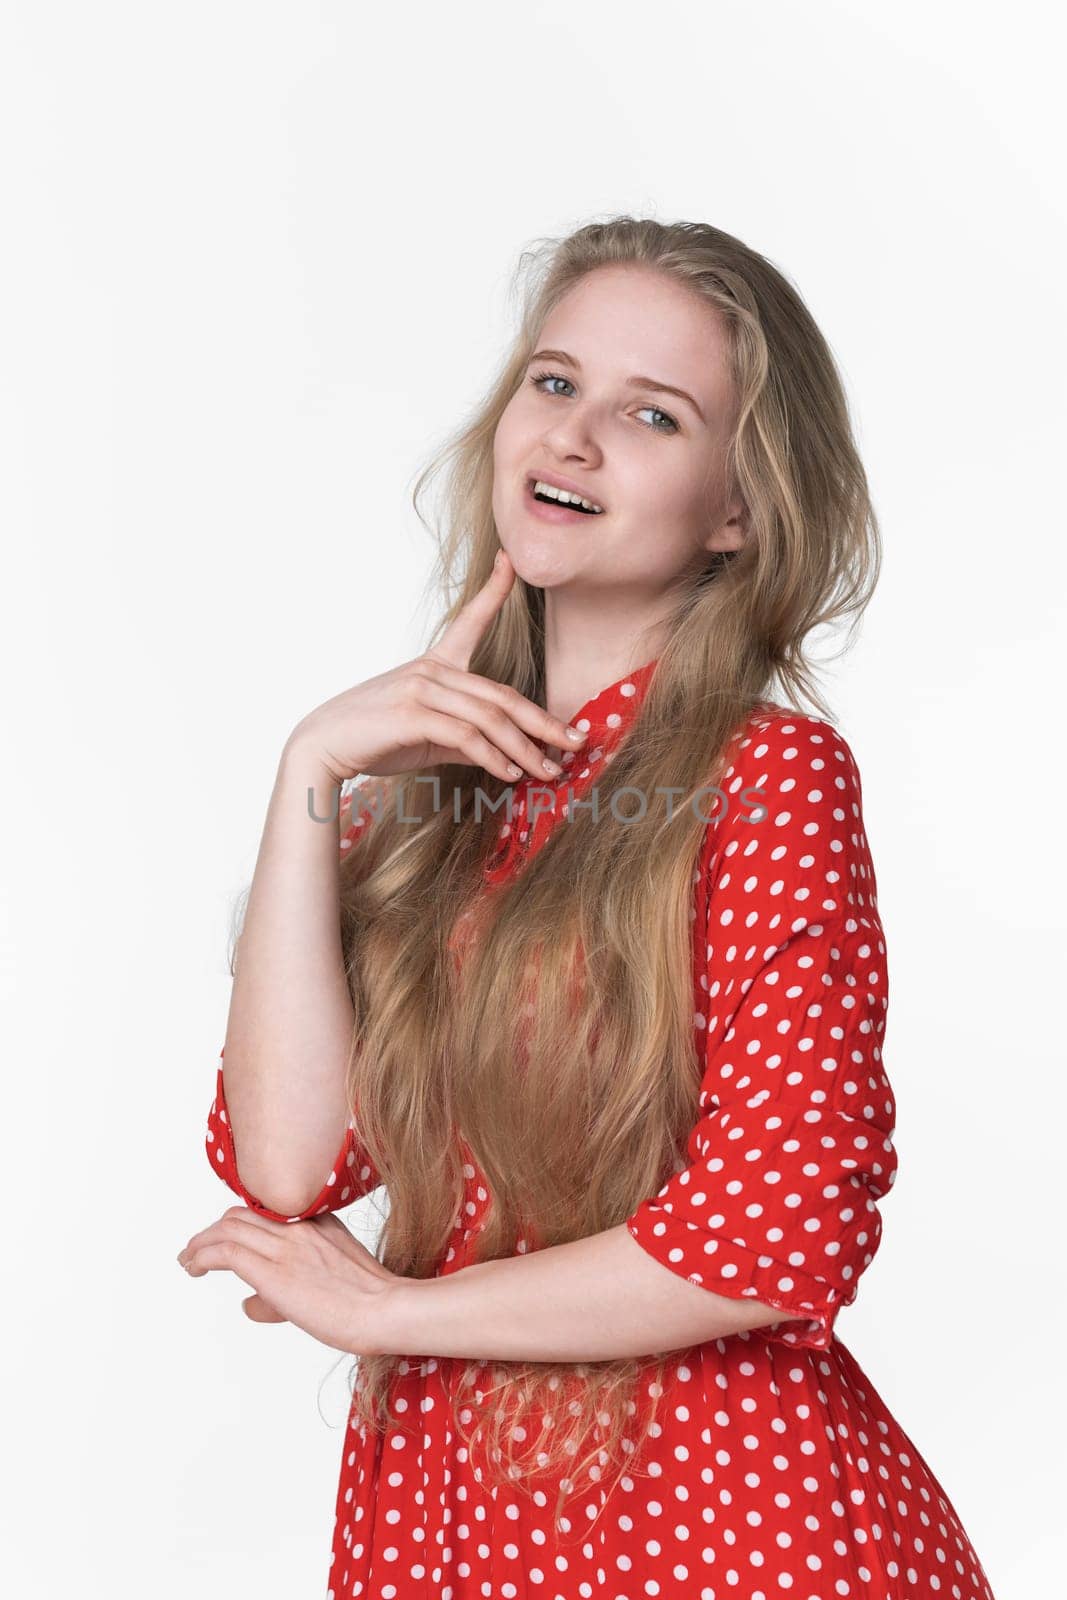 Playful young blonde female with long hair dressed in red polka dot dress poses on white background by Alexander-Piragis